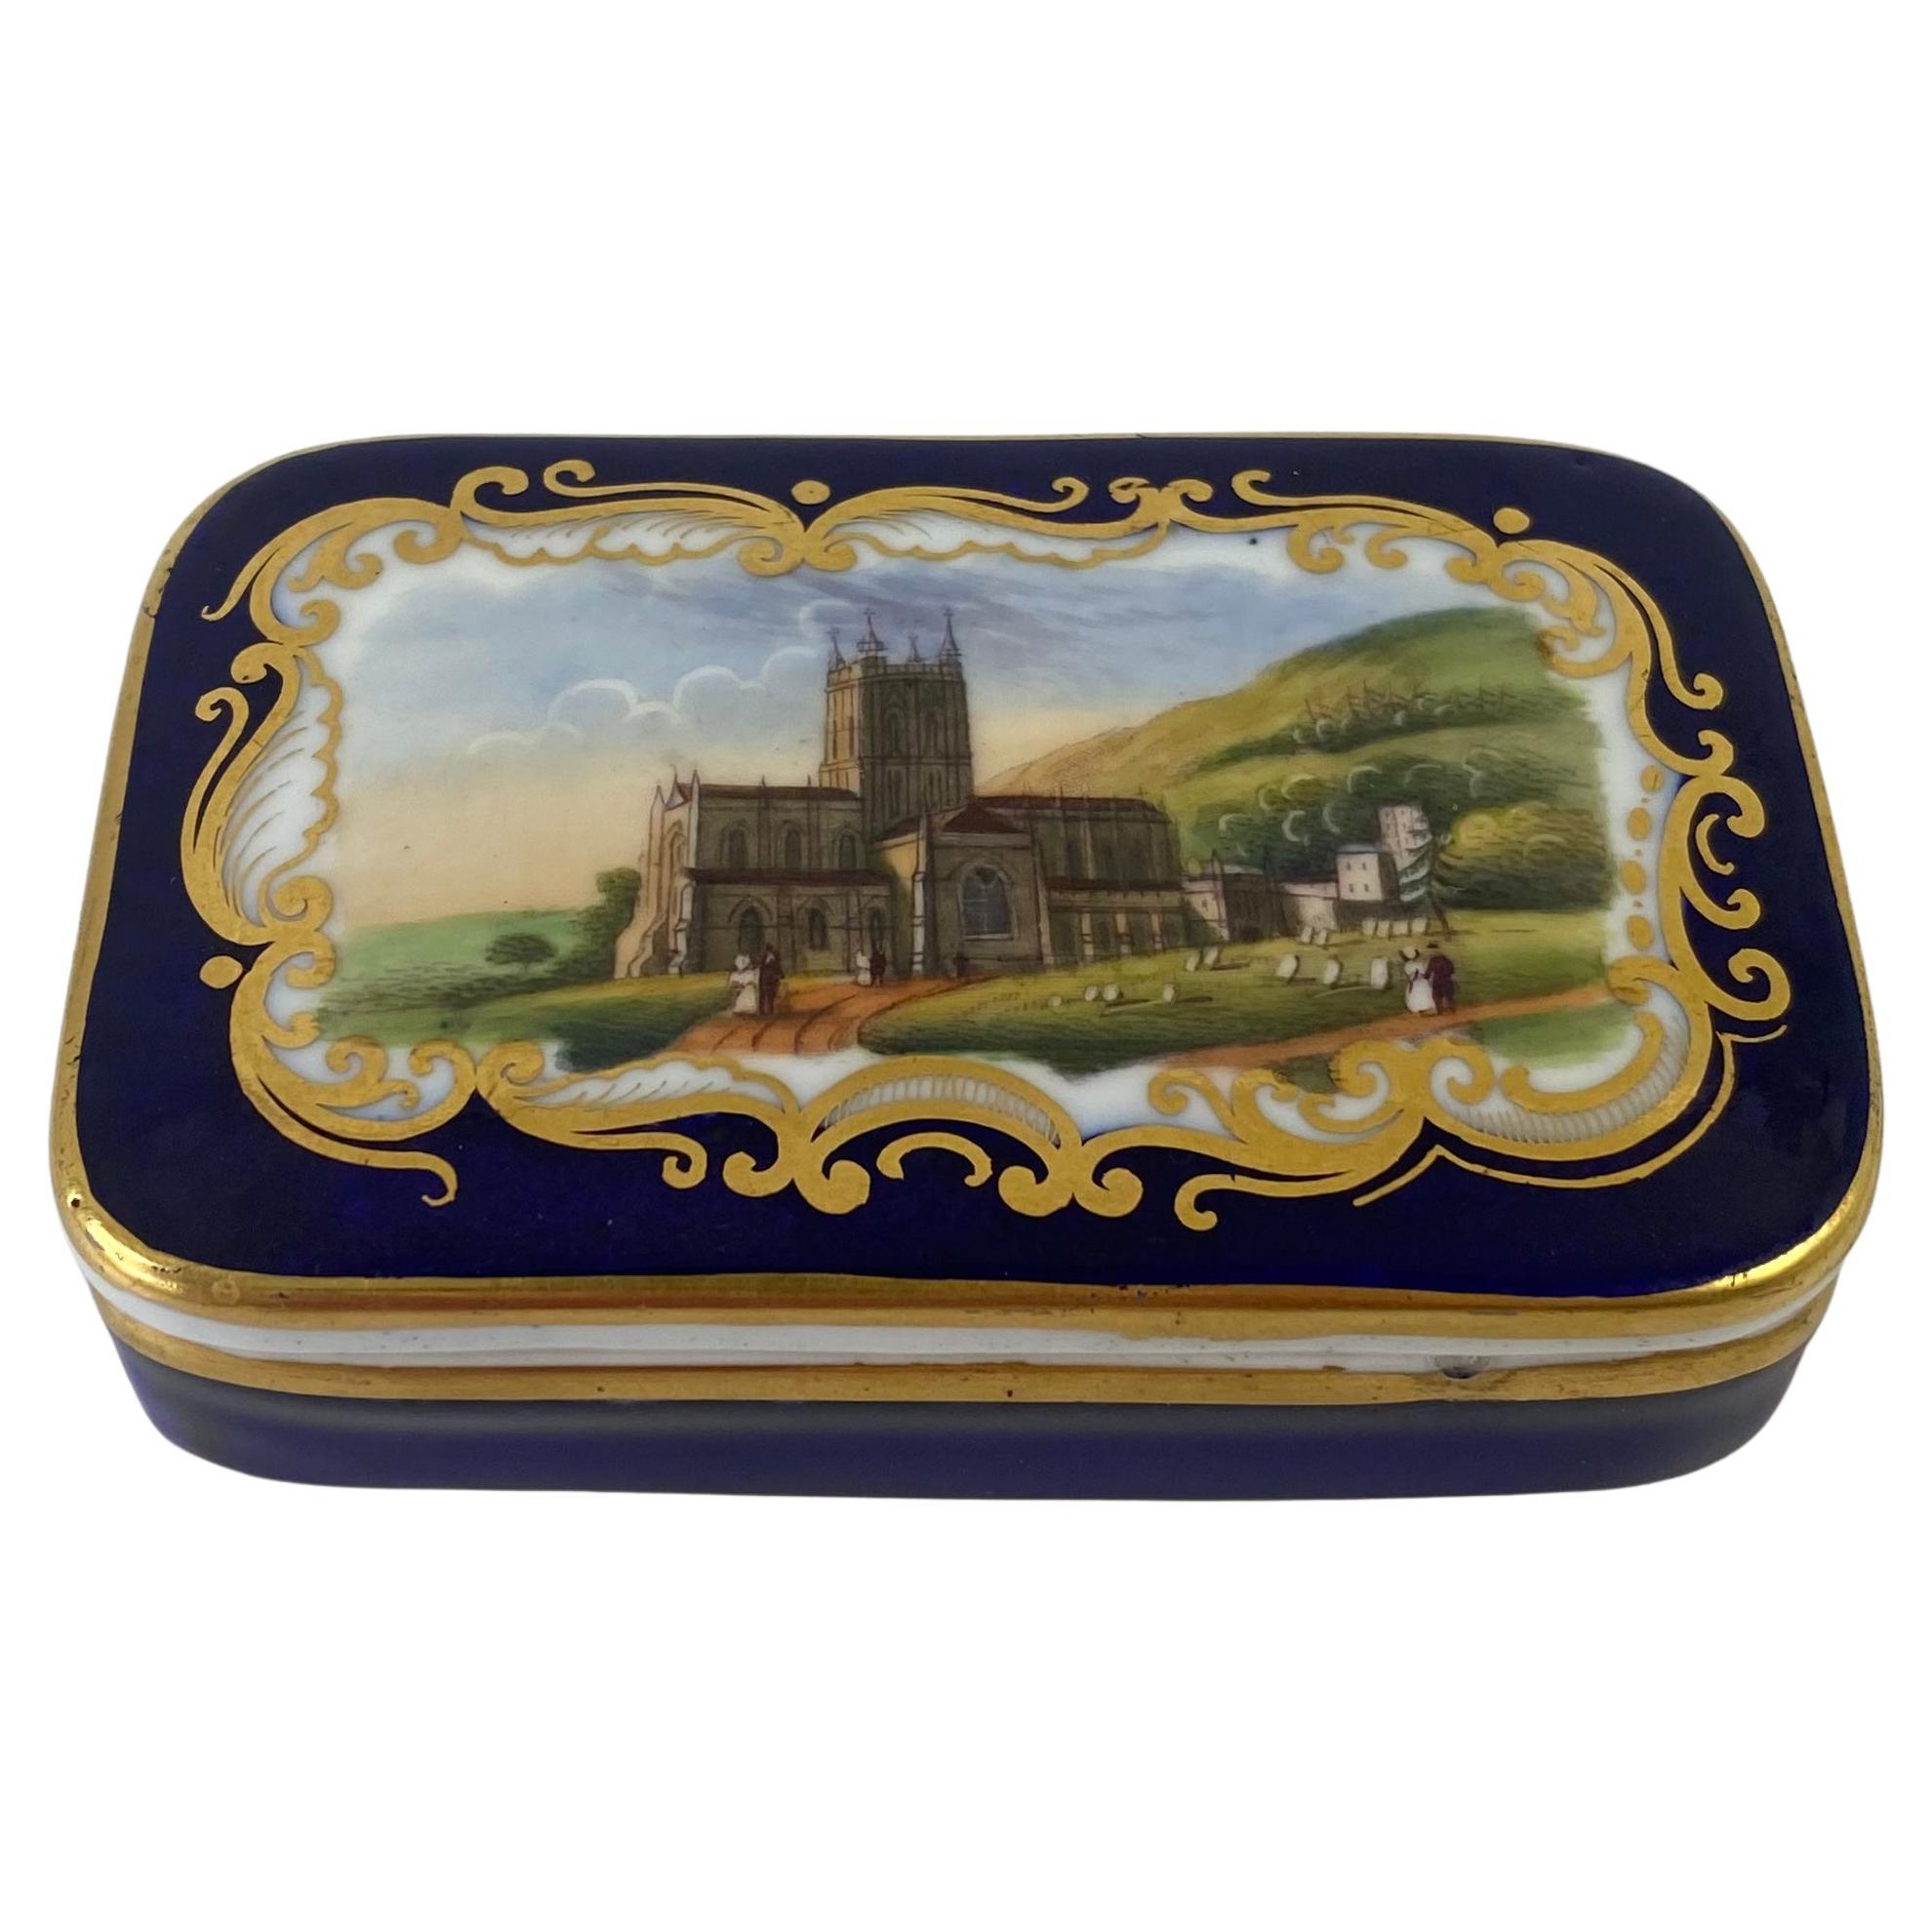 Chamberlain Worcester Porcelain Box and Cover, ‘Malvern’, c. 1840